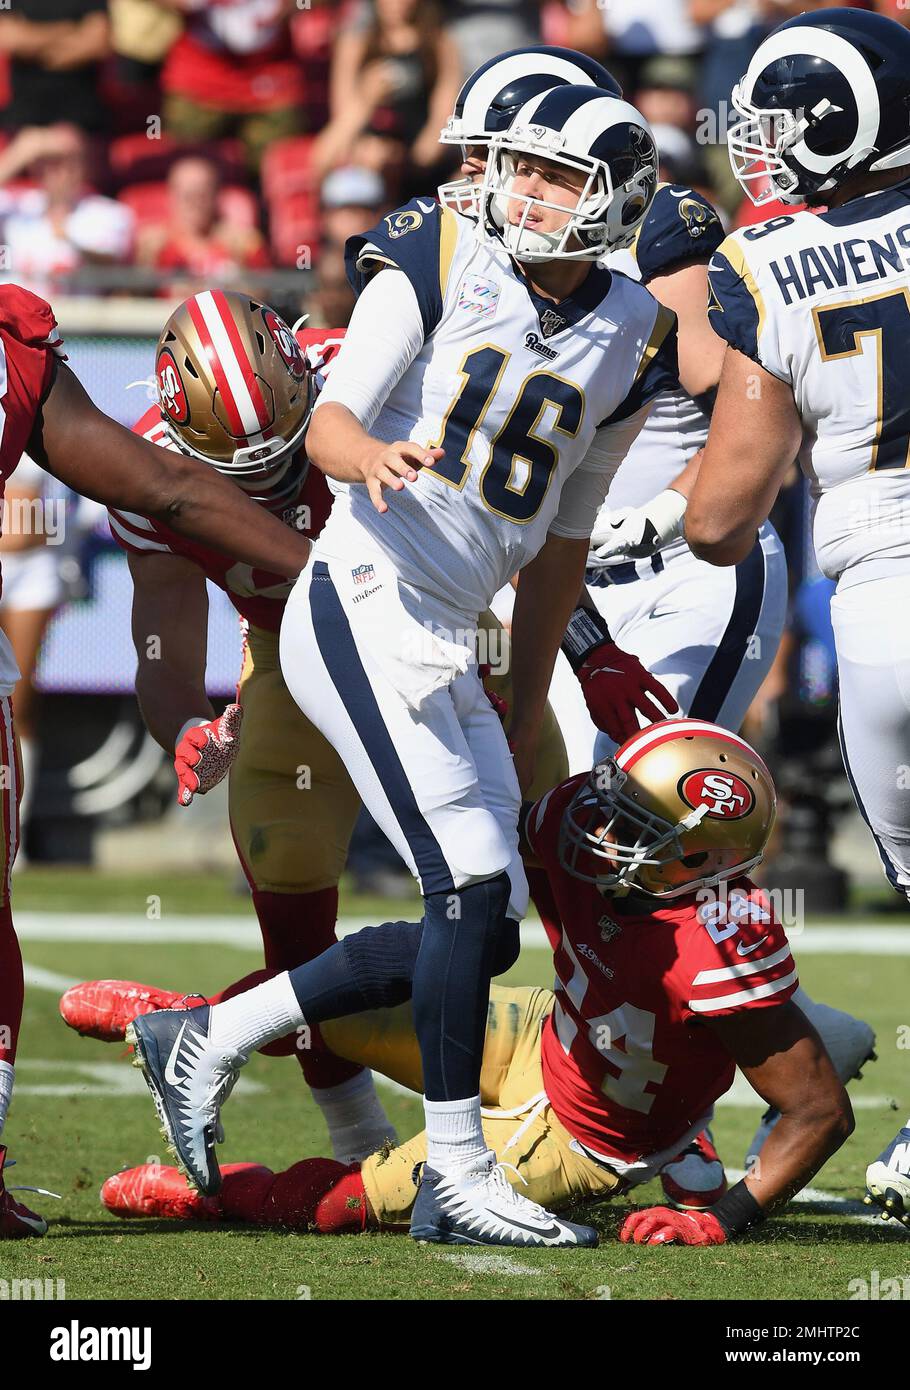 Los Angeles Rams quarterback Jared Goff (16) off balance after being hit  while passing the ball during an NFL football game against the San  Francisco 49ers, Sunday, October 13, 2019 in Los